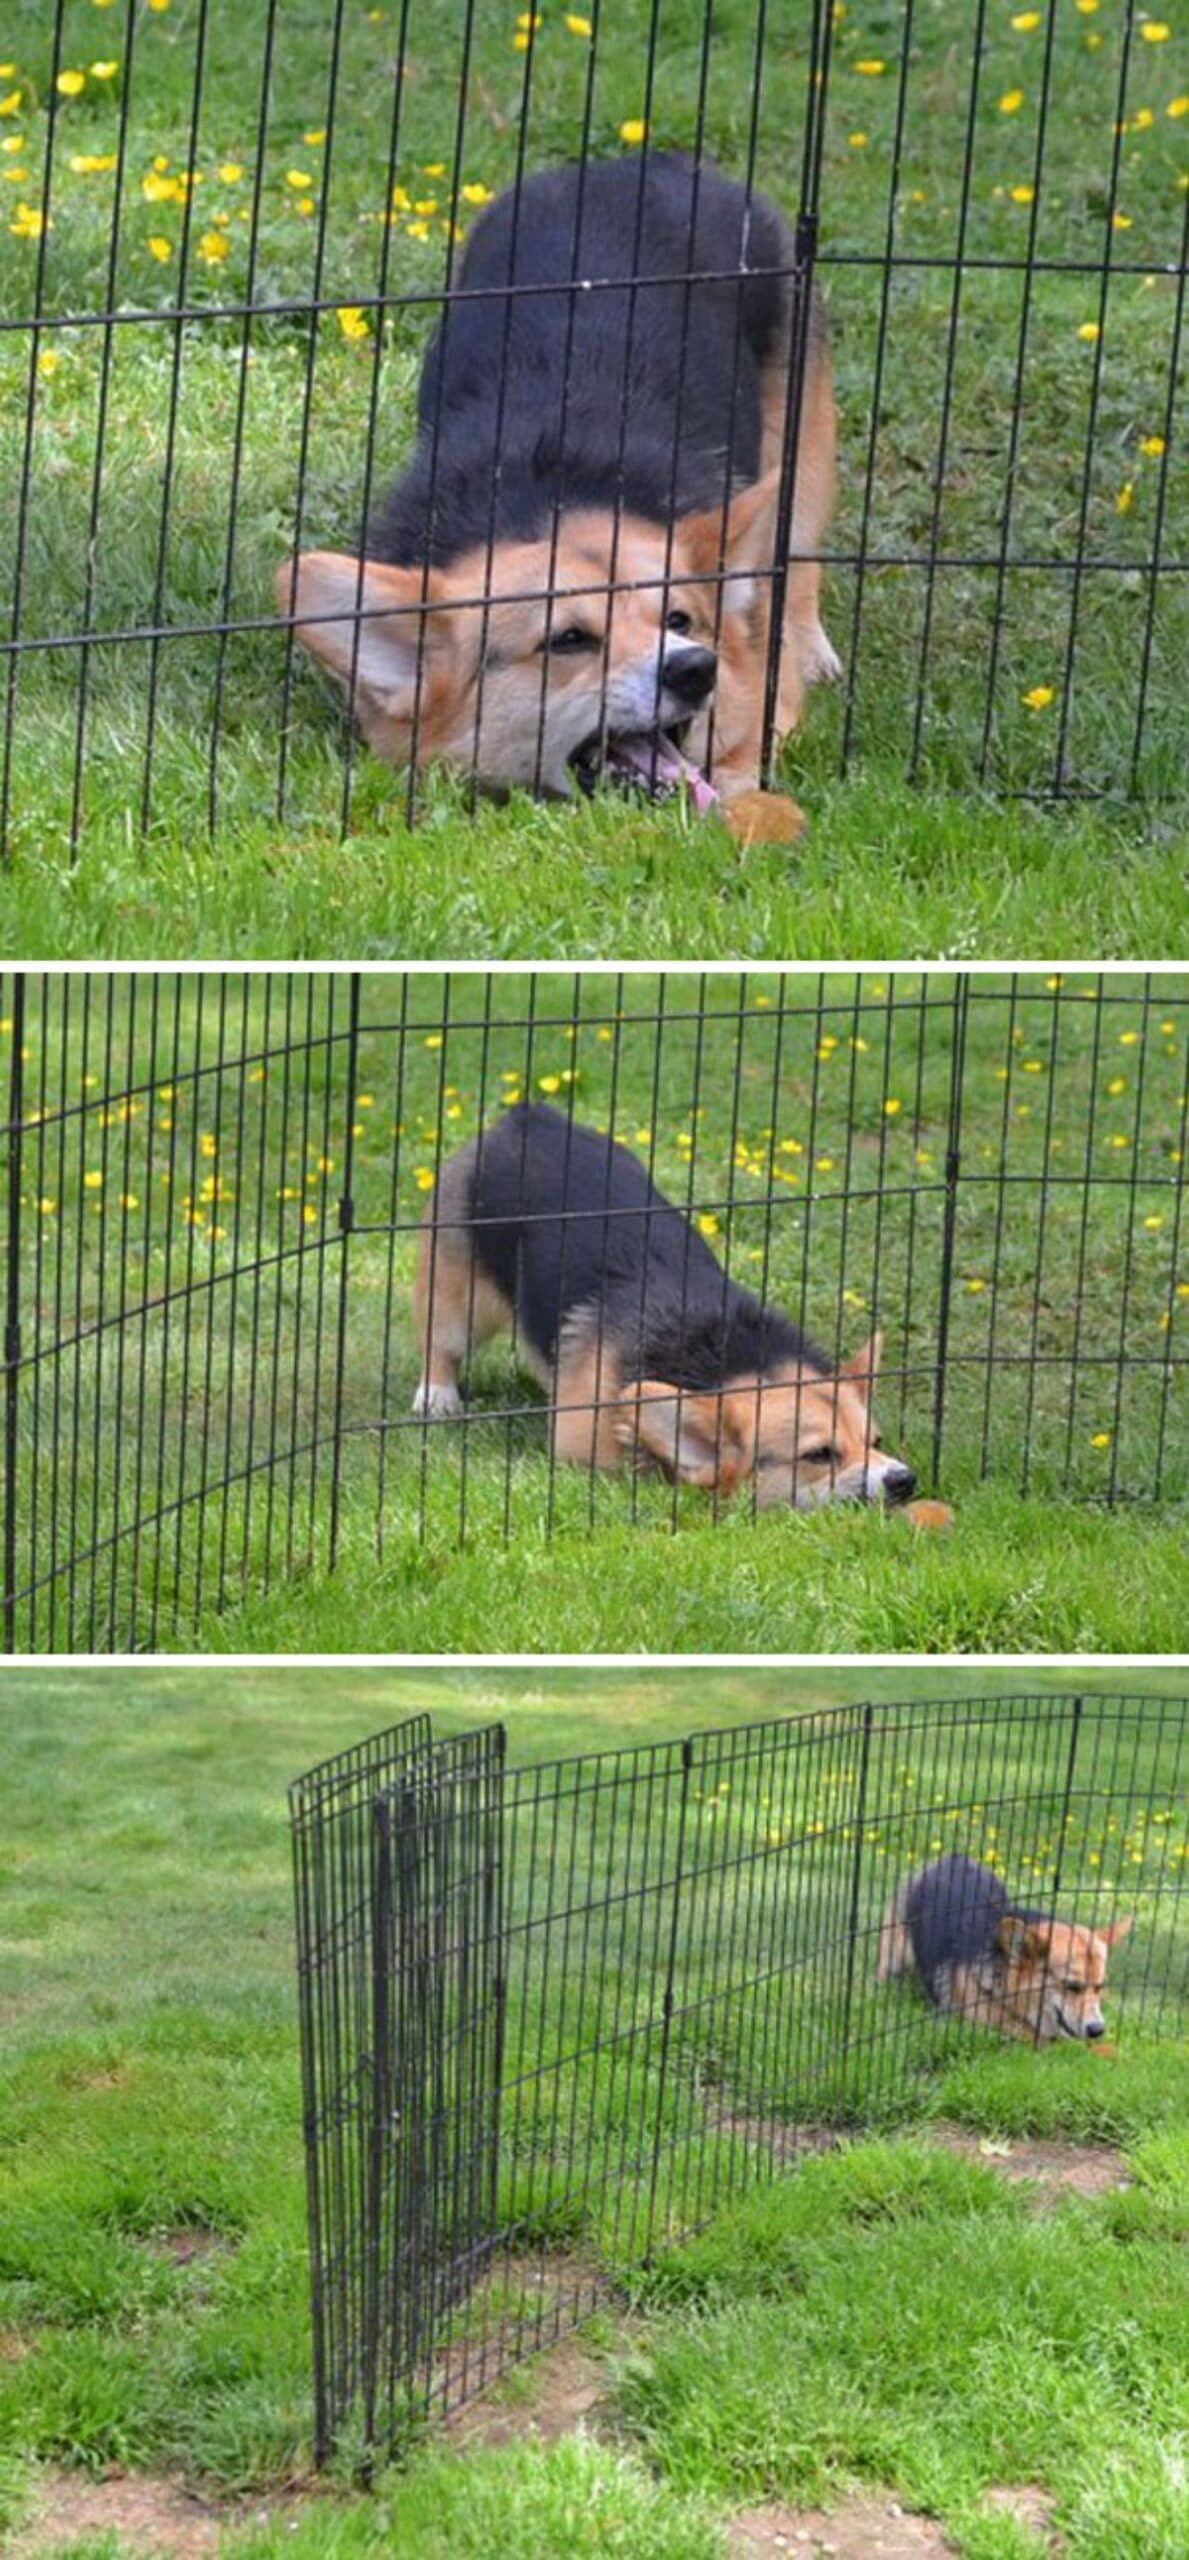 3 photos showing a black and brown corgi trying to reach something through a black fence with the last image showing the gate is open at the end